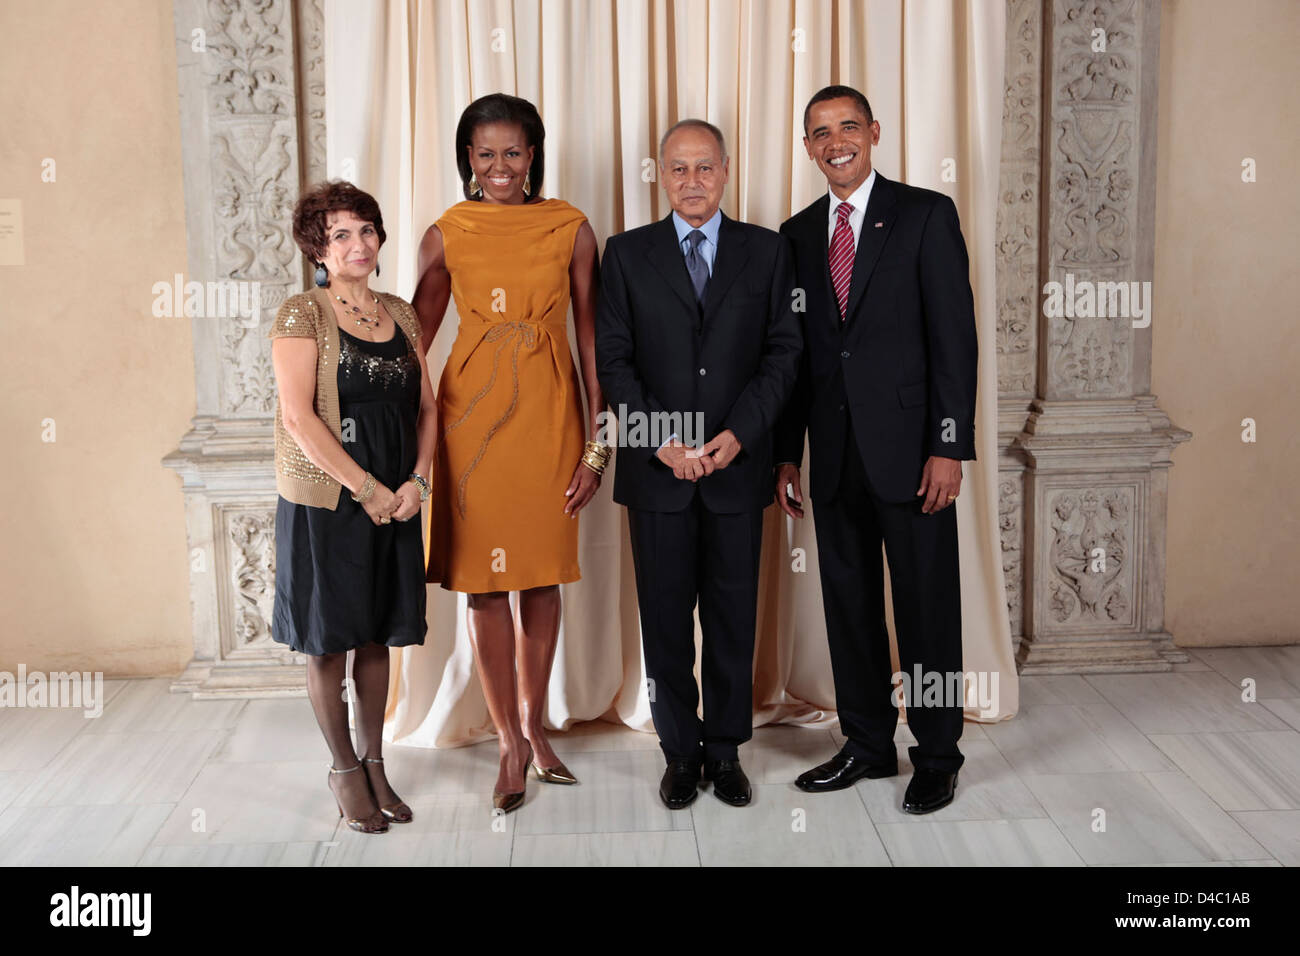 U.S. President Barack Obama and First Lady Michelle Obama With World Leaders at the Metropolitan Museum in New York Stock Photo